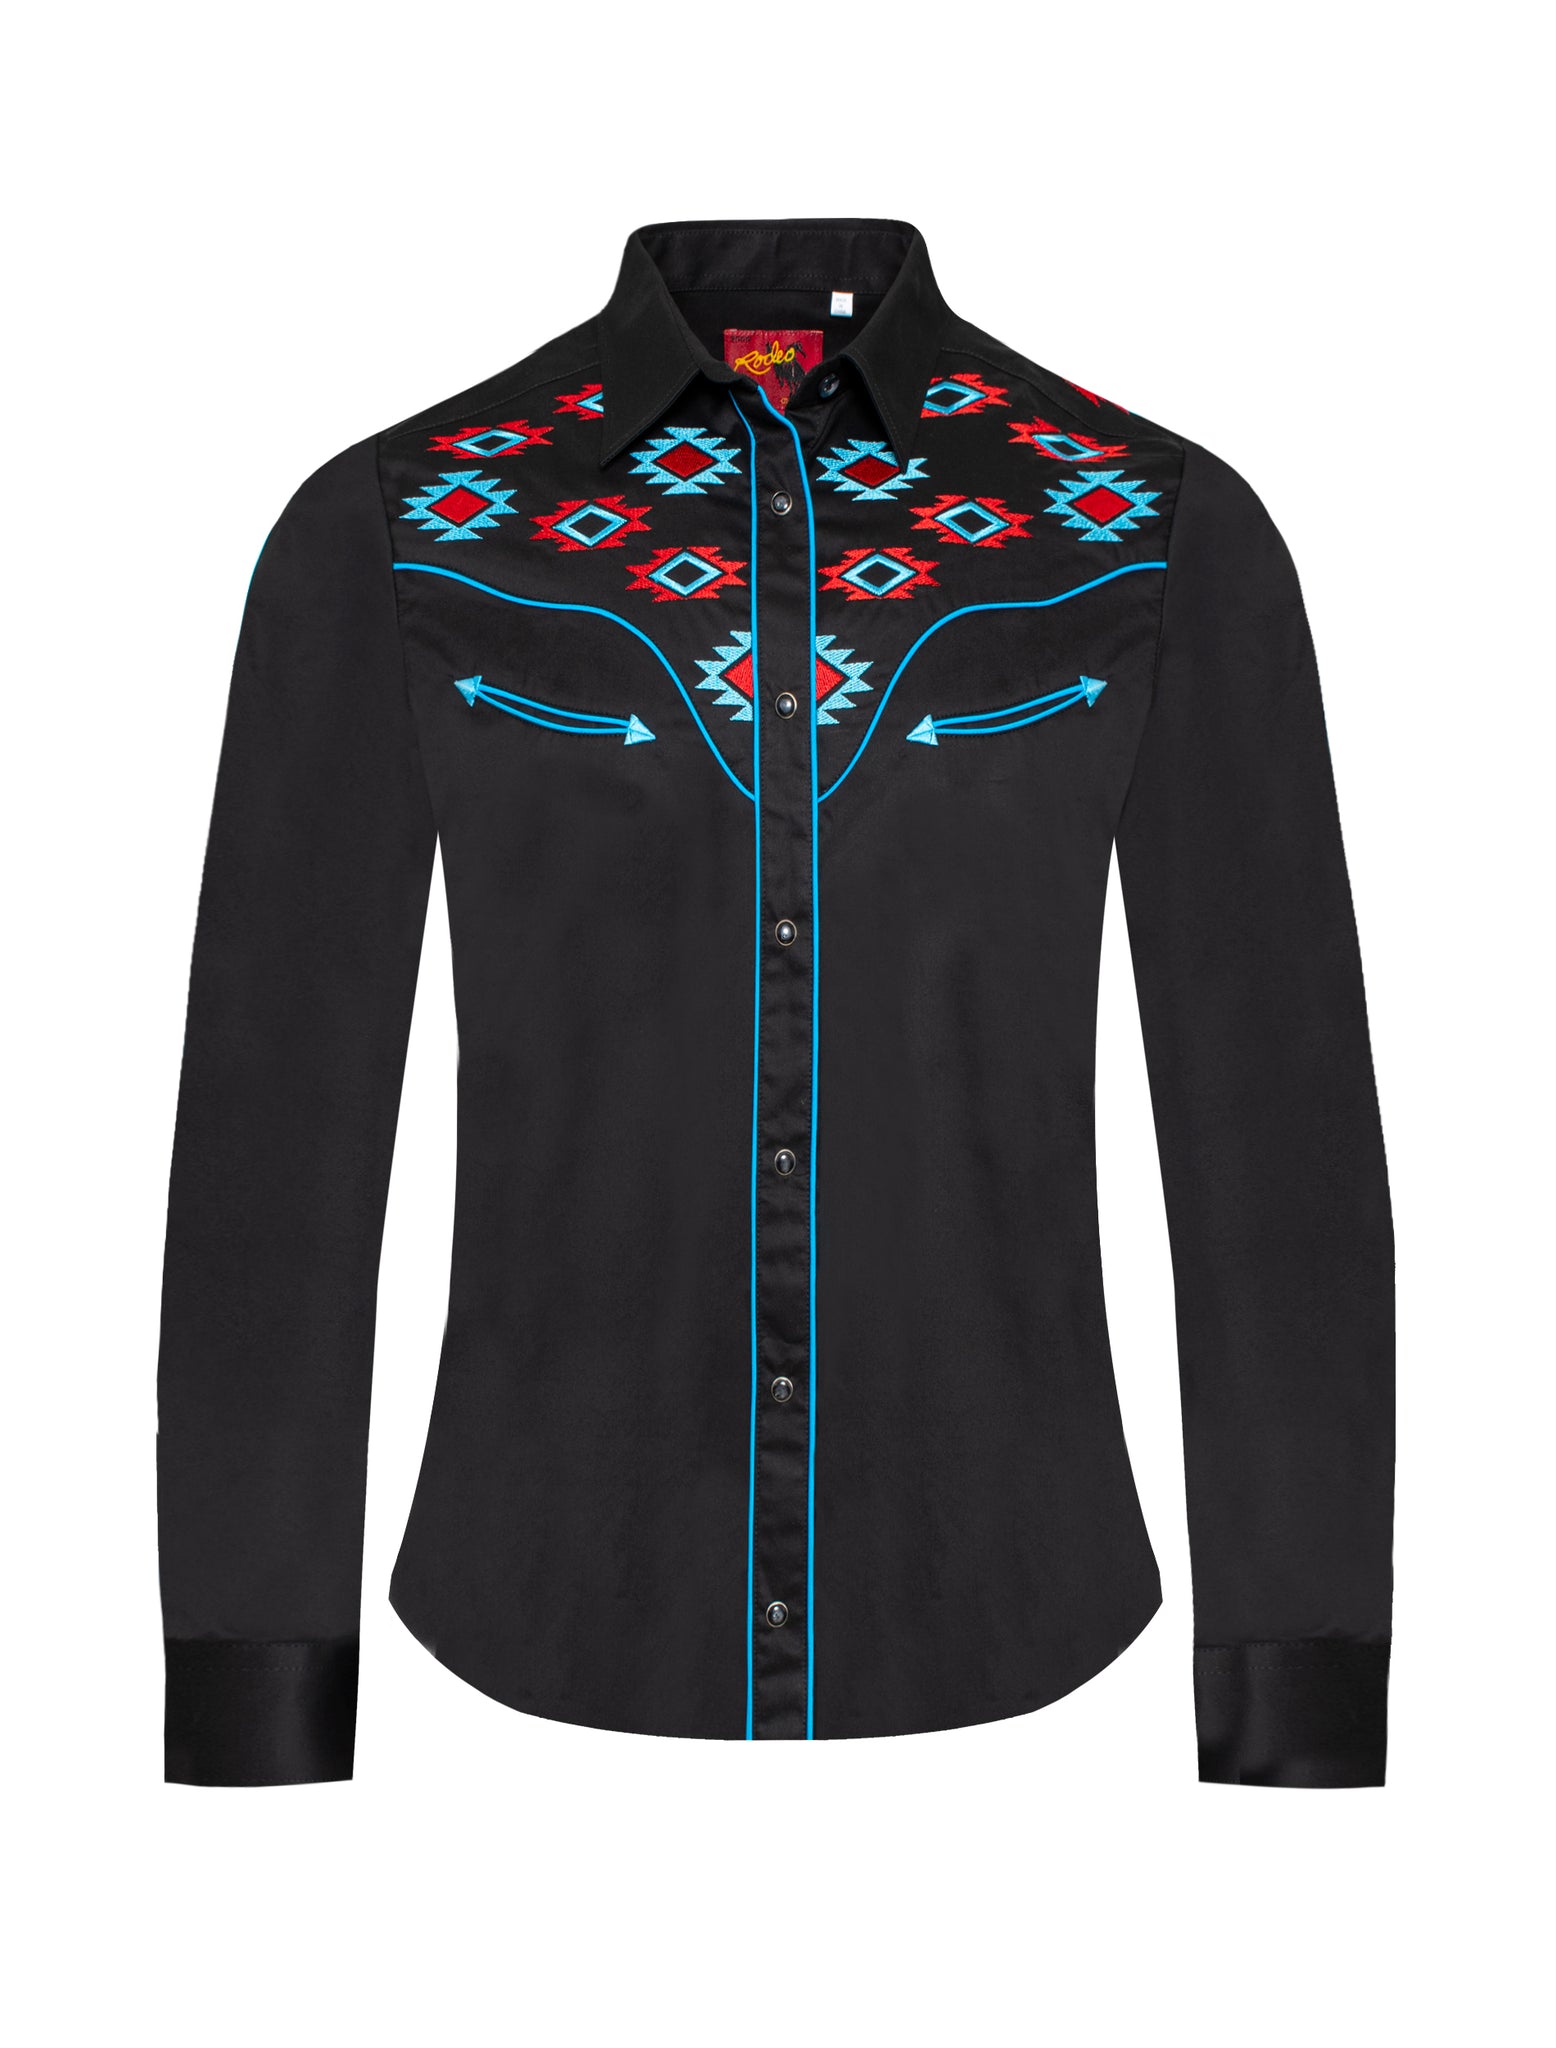 Women’s Western Embroidered Shirts-LS500-520